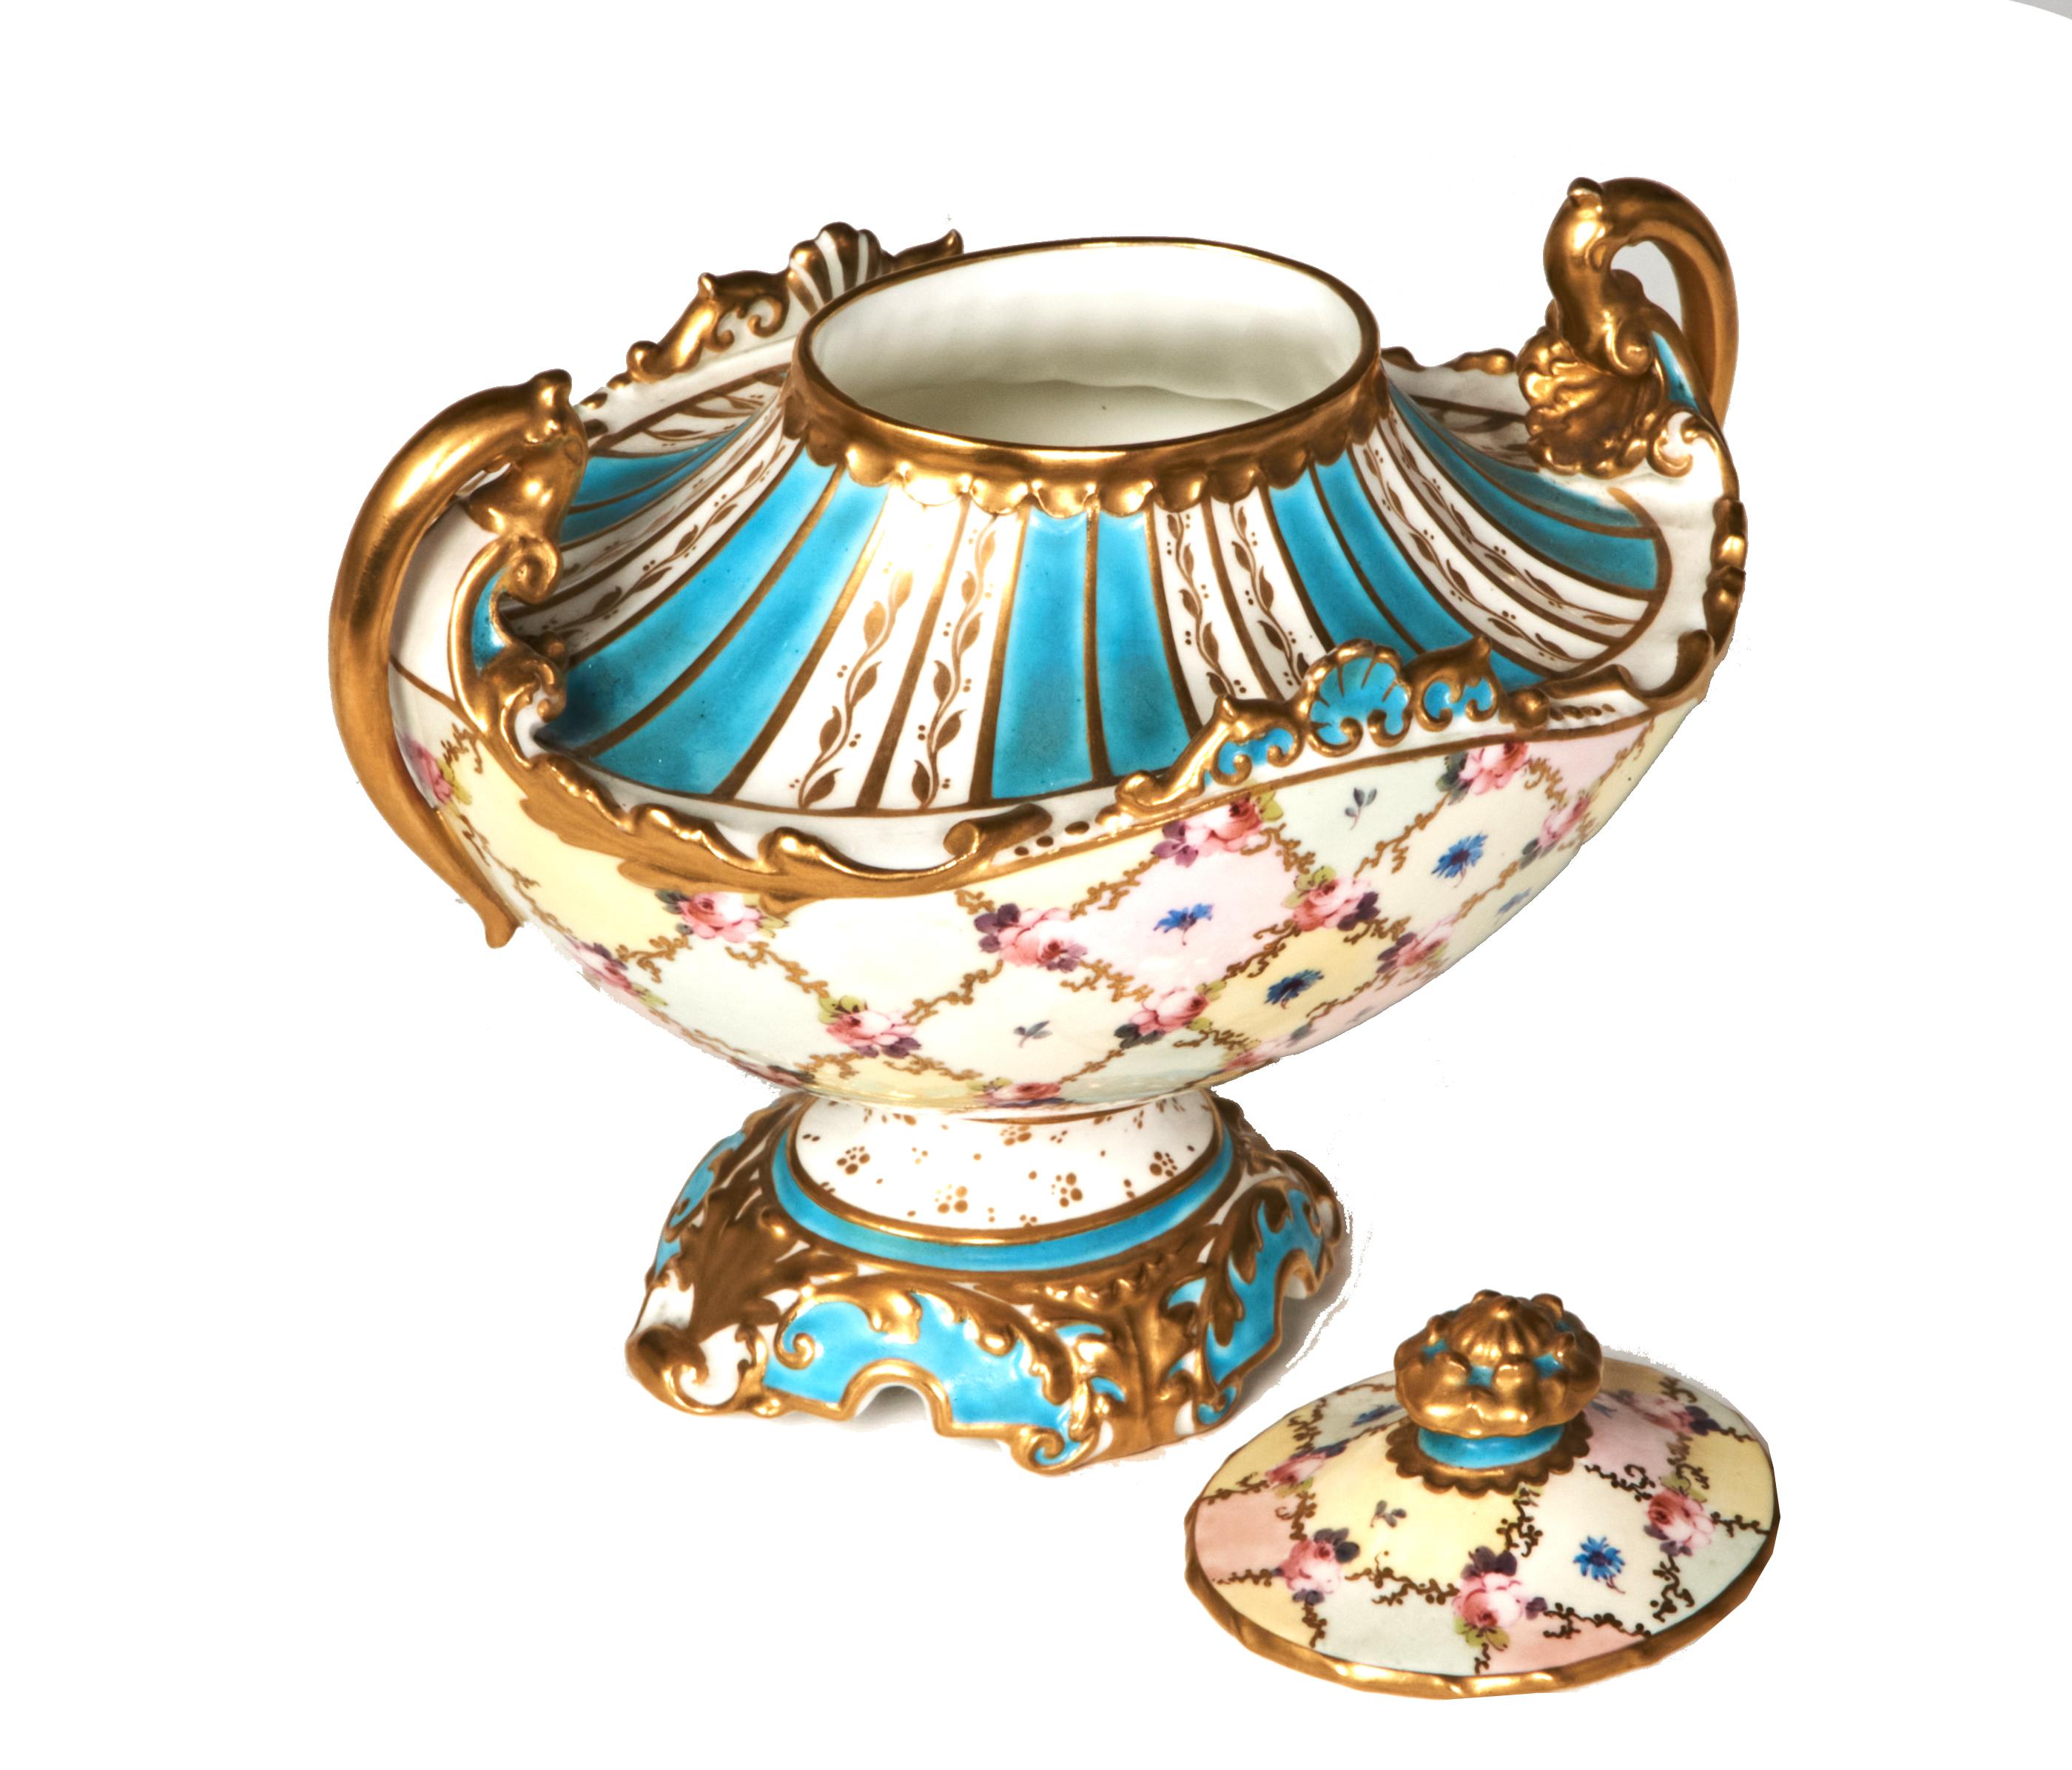 Delicately hand painted small antique covered dish by Royal Crown Derby with stripes of Sevres blue and white and a lattice pattern in gold and tiny flowers. No signs of wear to the gold or use. It is in excellent condition without cracks, chips or